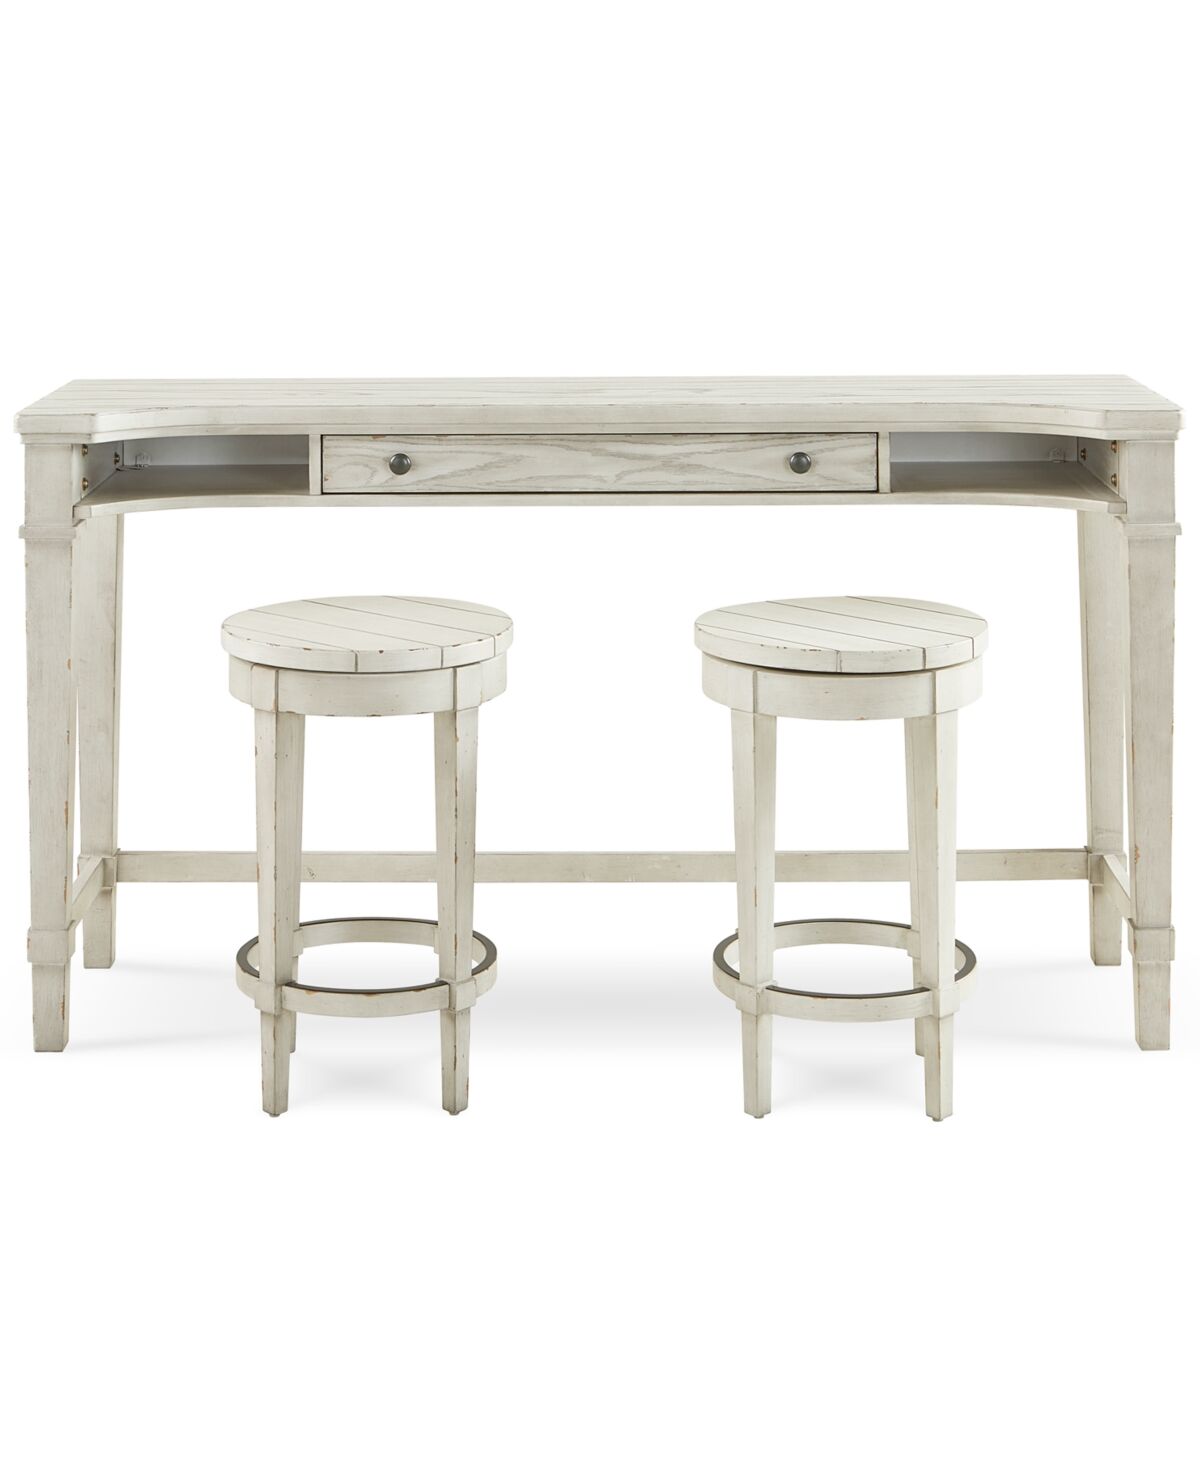 Furniture Belhaven Sofa Table with 2 Stools - Weathered Plank